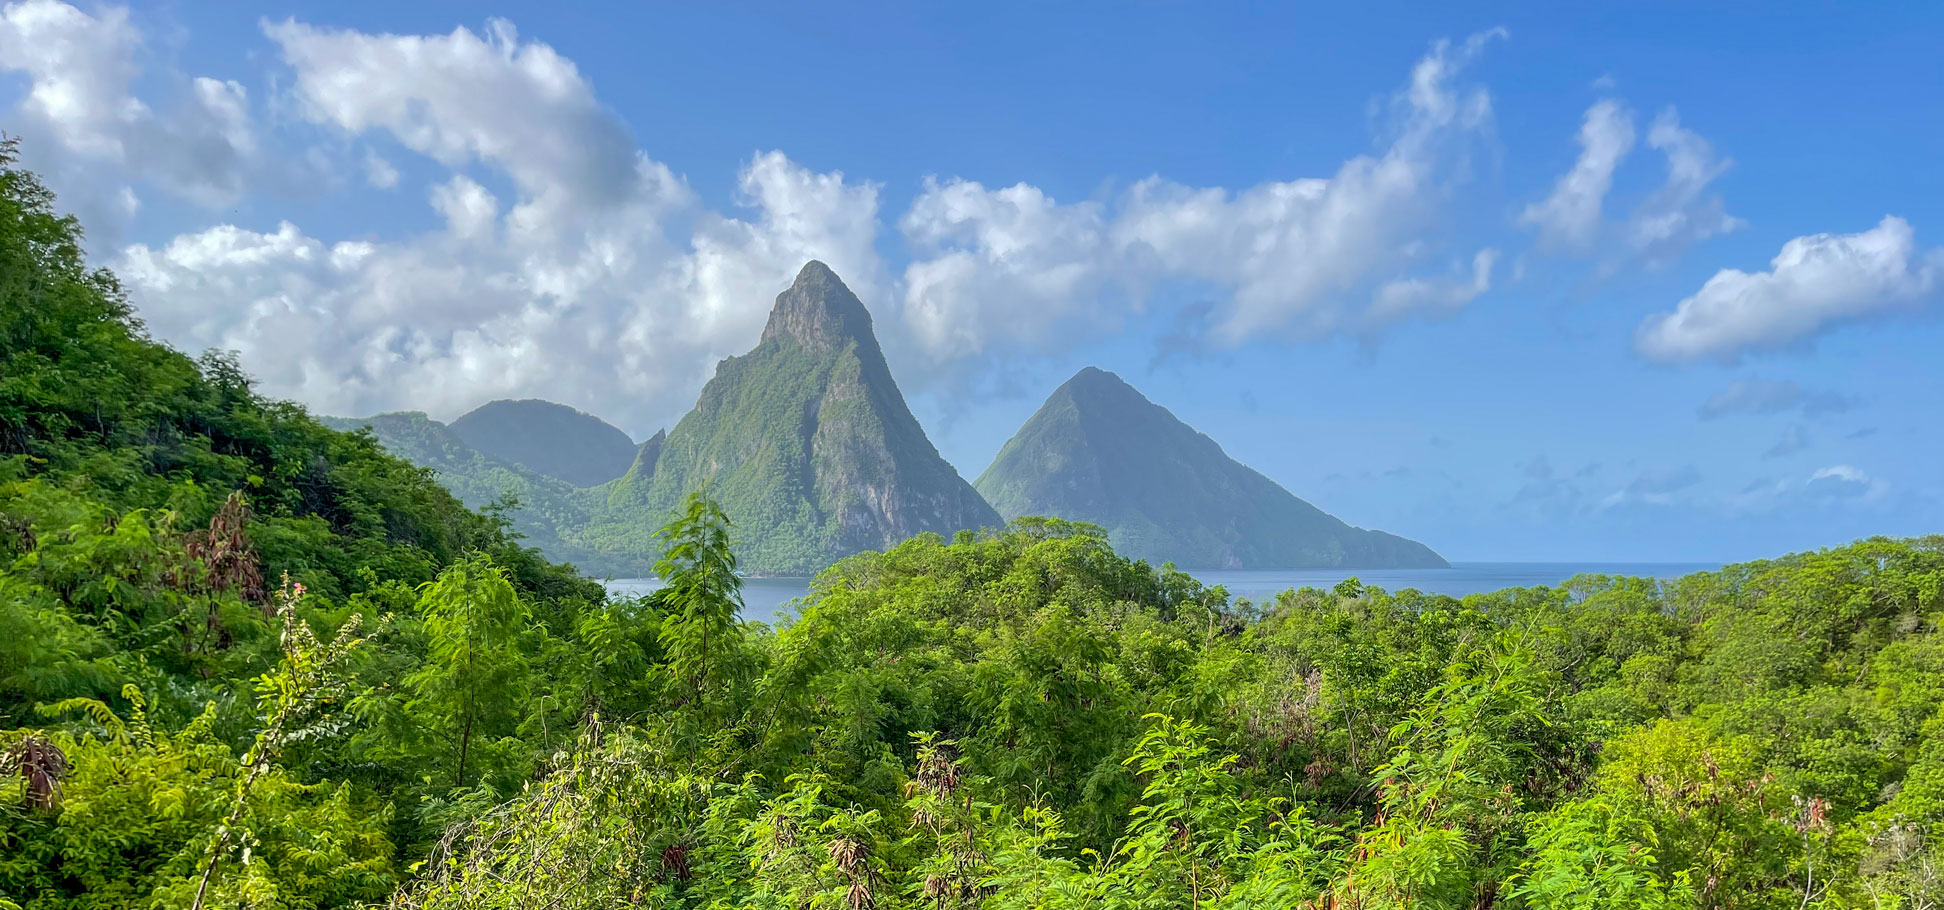 The twin peaks of Petit Piton (in front) and Gros Piton in southwestern St. Lucia